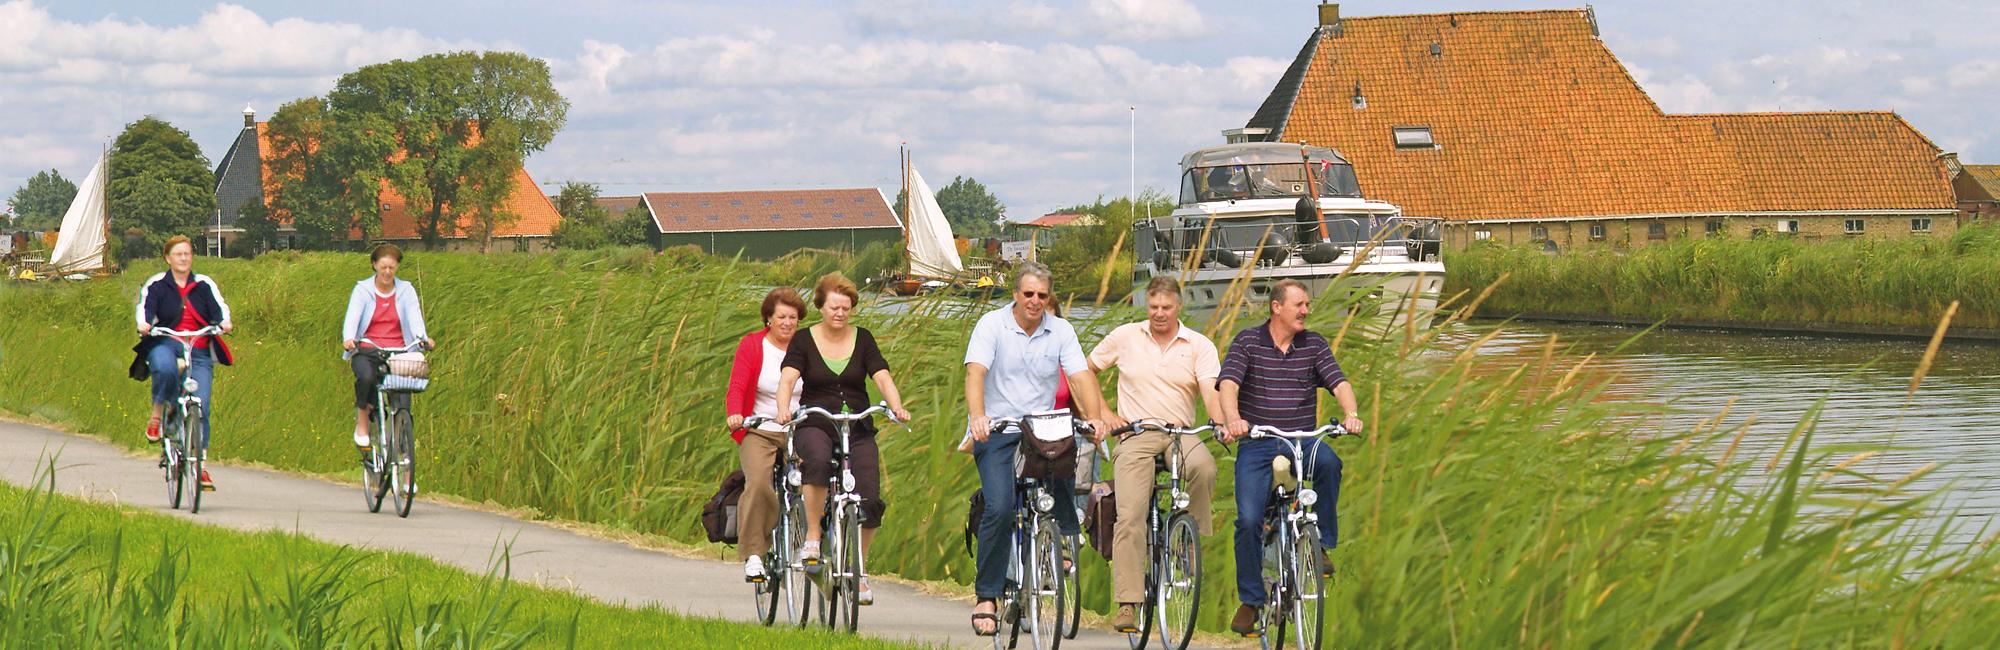 Dutch Bike Tours Cycling holiday Frisian Towns and Lakes